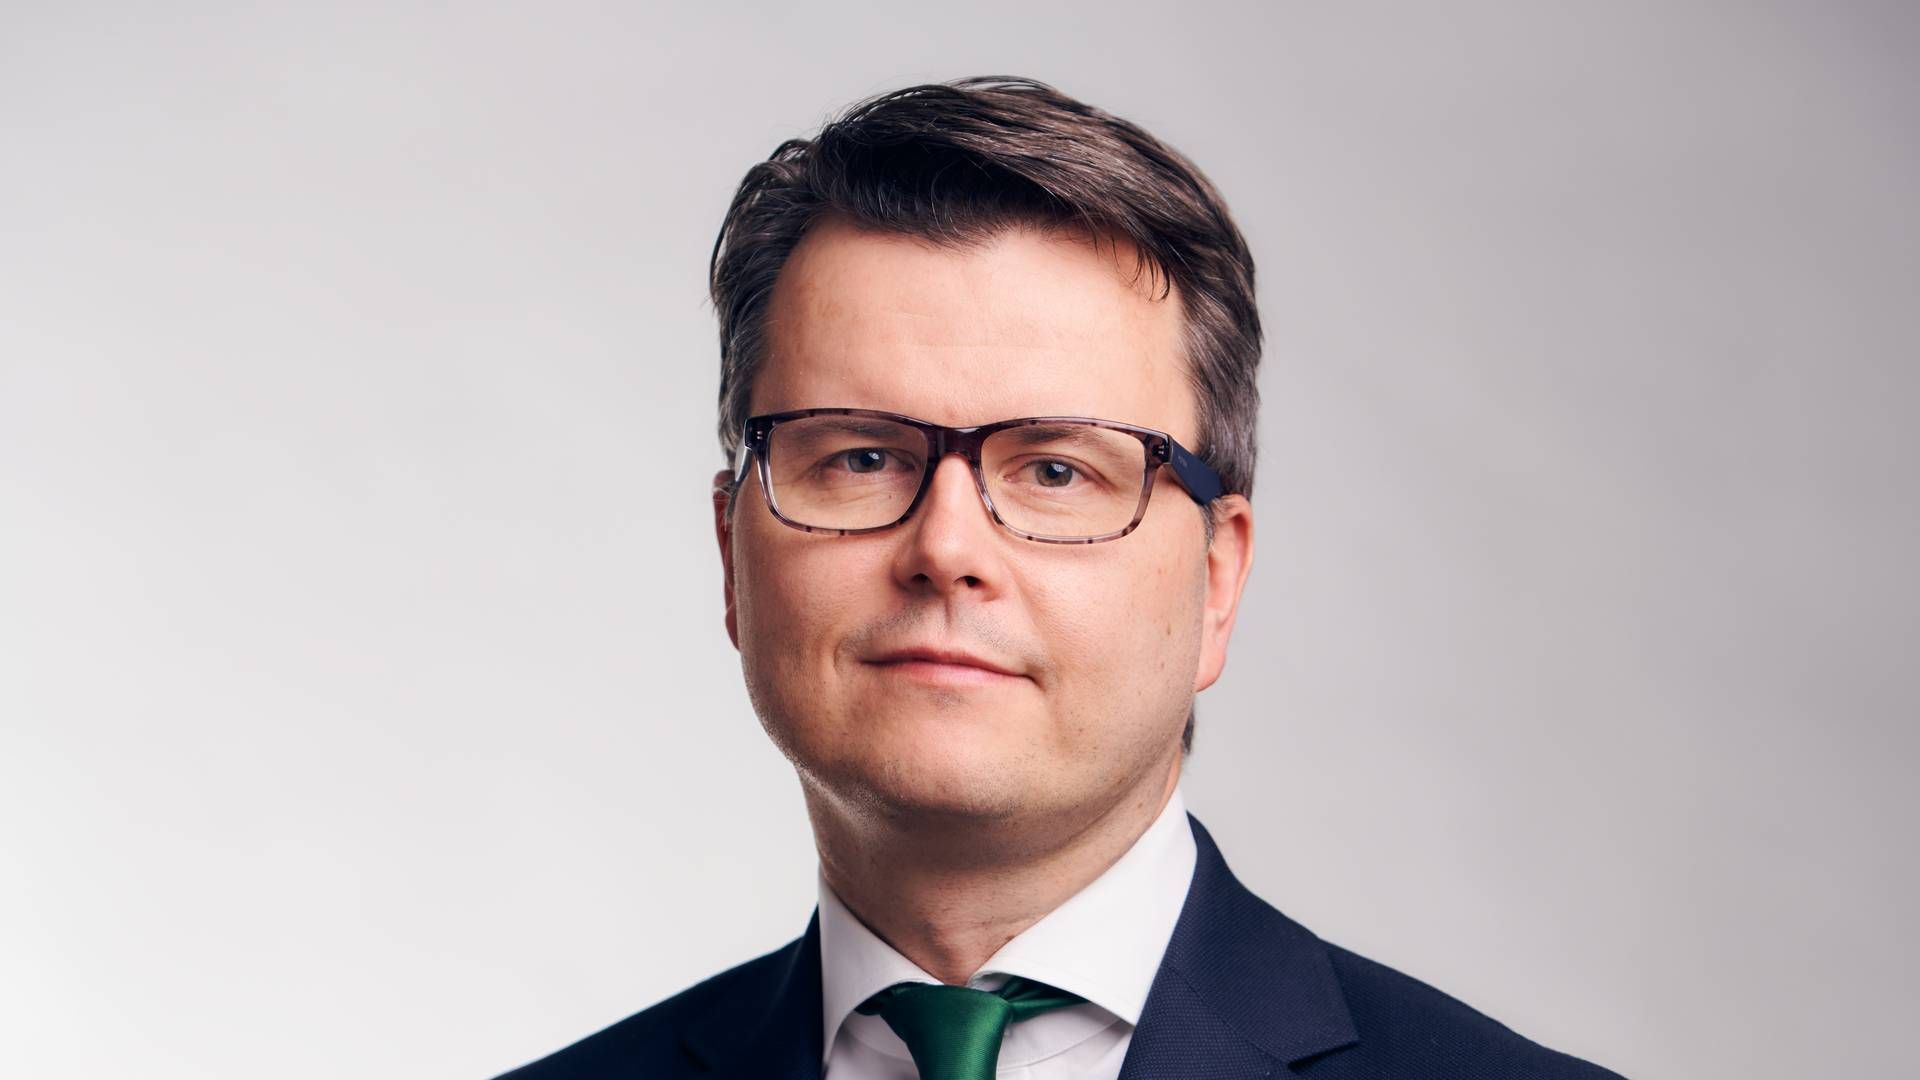 According to Samu Slotte, Head of Sustainable Finance at Danske Bank, the bank’s climate plan only targets fossil customers who own license rights for fossil extraction and exploration for new oil fields. | Photo: Pr / Danske Bank